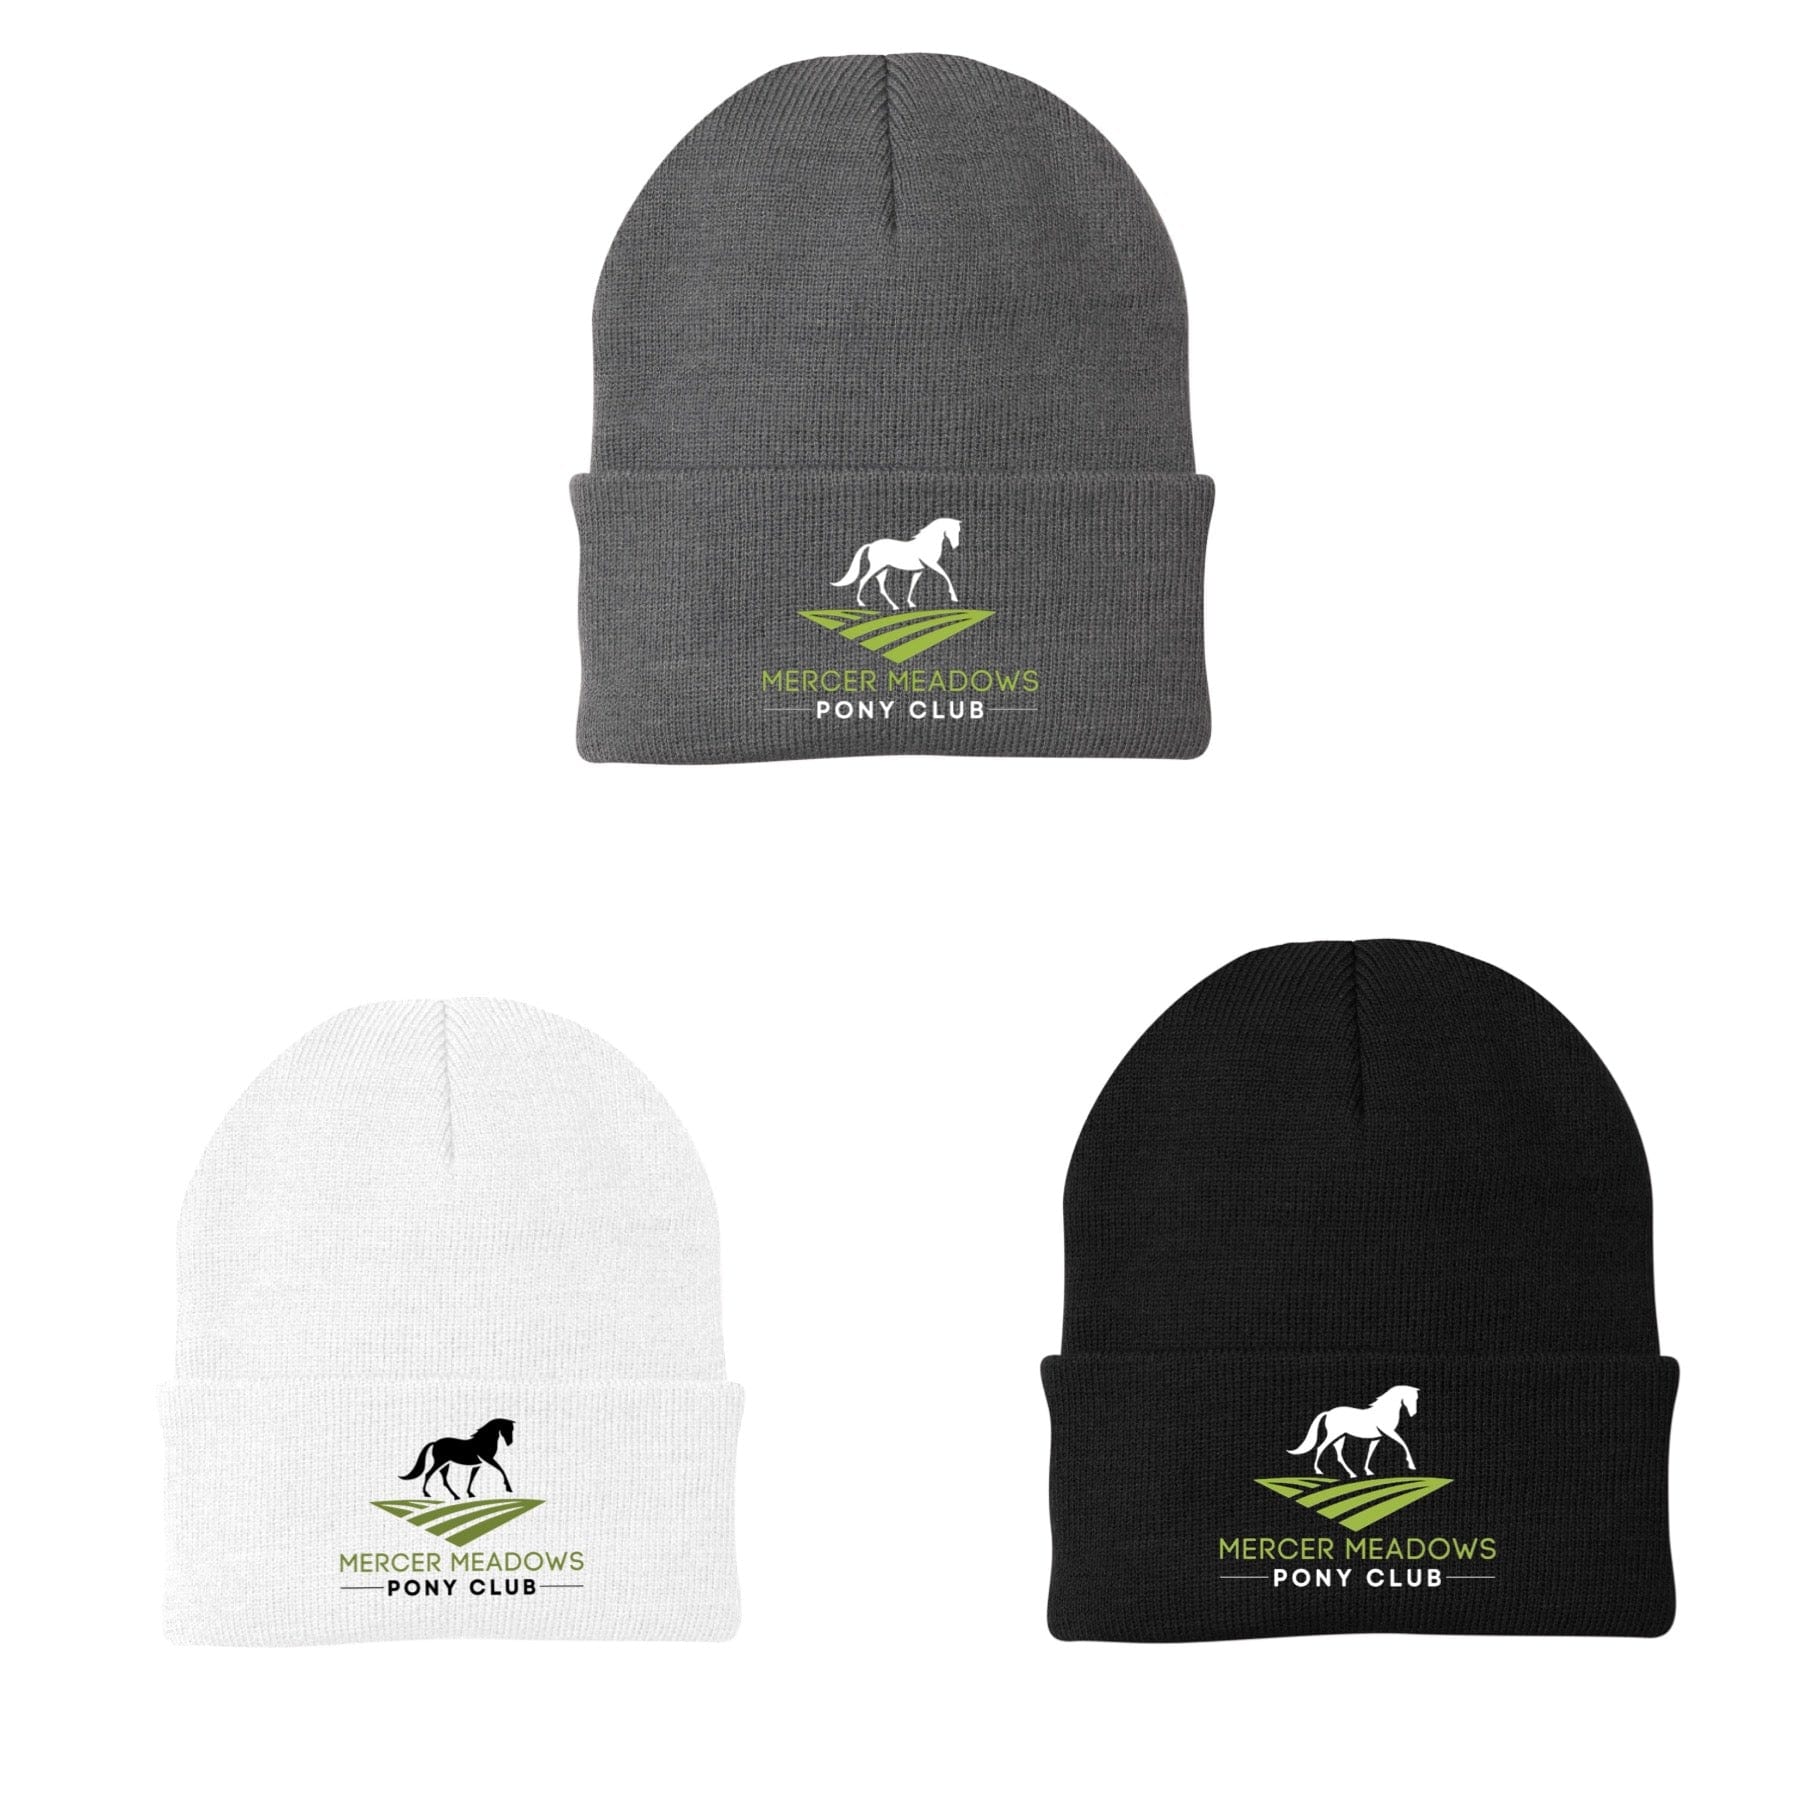 Equestrian Team Apparel Mercer Meadows Pony Club Beanie equestrian team apparel online tack store mobile tack store custom farm apparel custom show stable clothing equestrian lifestyle horse show clothing riding clothes horses equestrian tack store